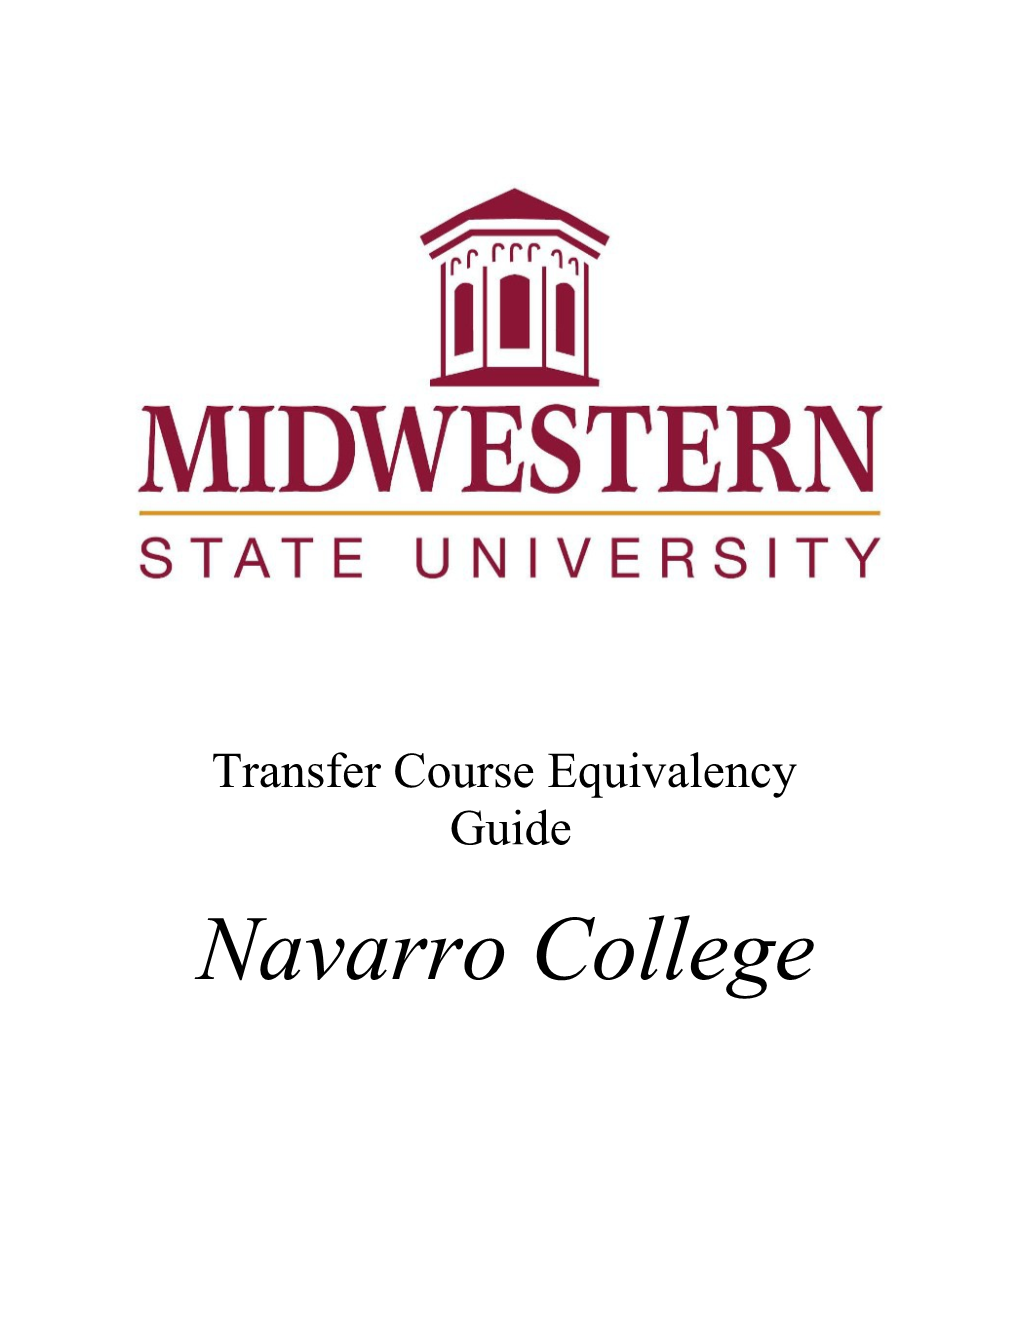 Use This Checklist to Mark the Courses Taken at Navarro College